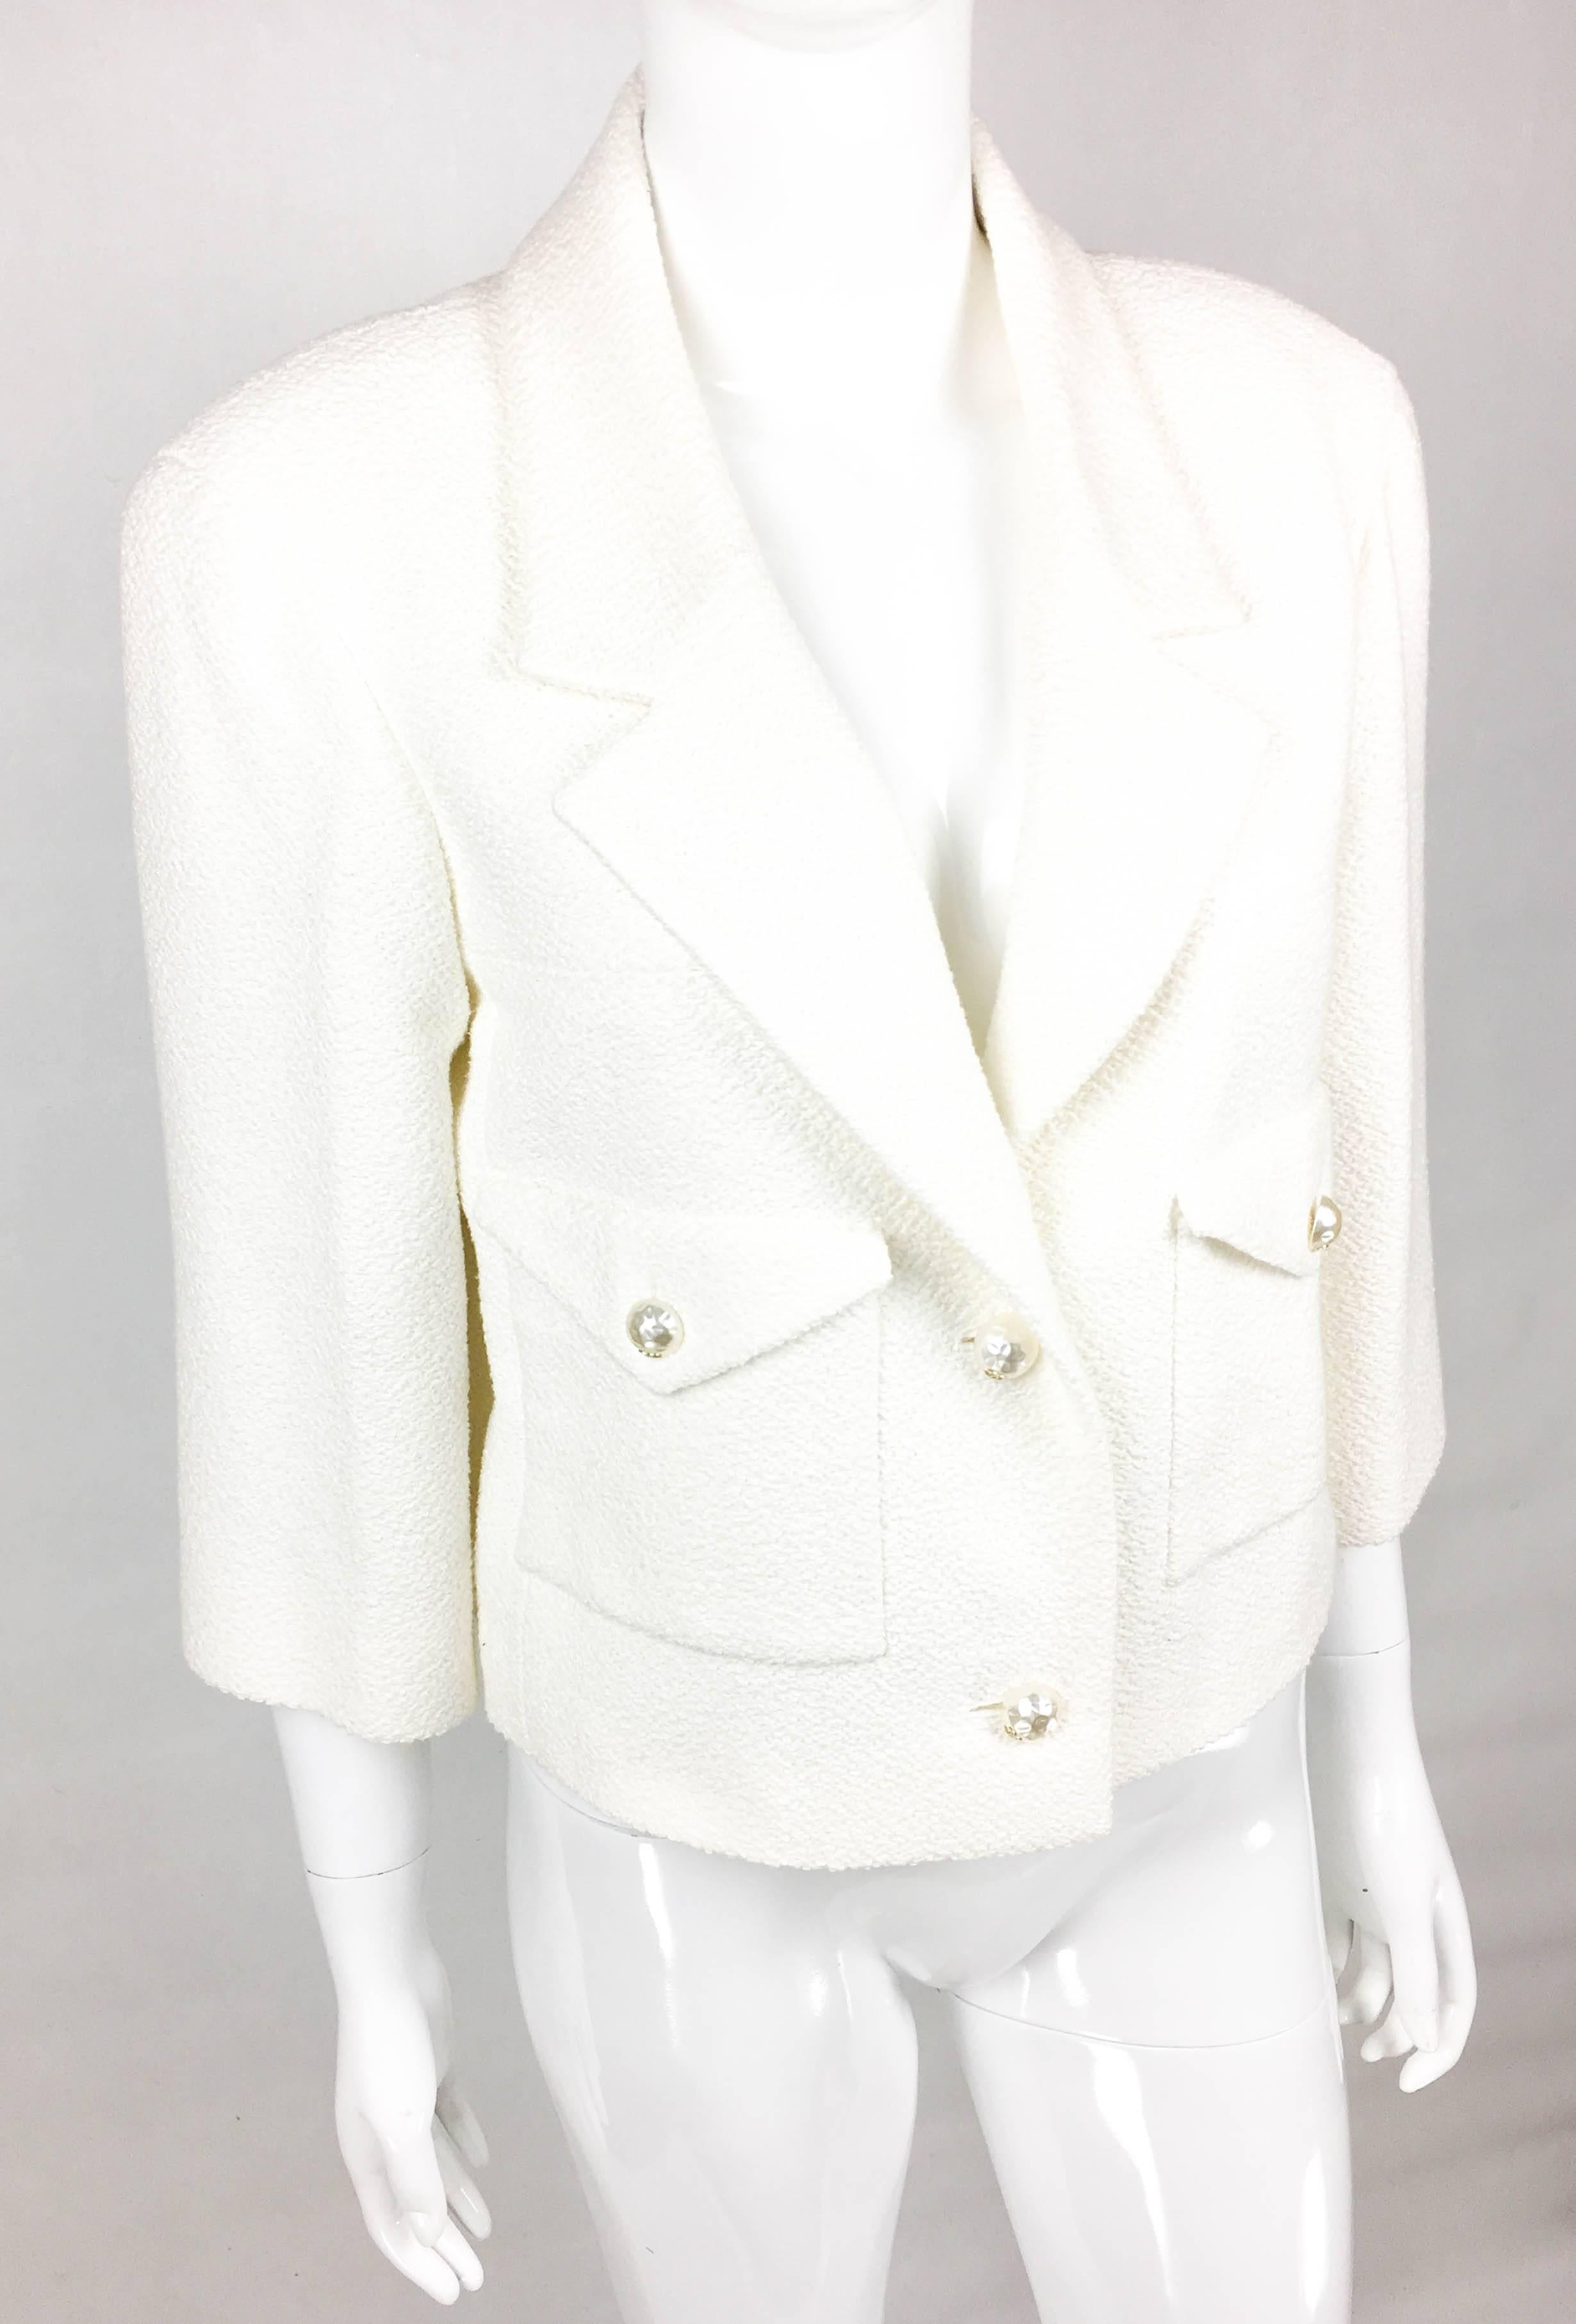 Women's 2012 Chanel Runway Look White Cotton Jacket With Faux-Pearl Buttons